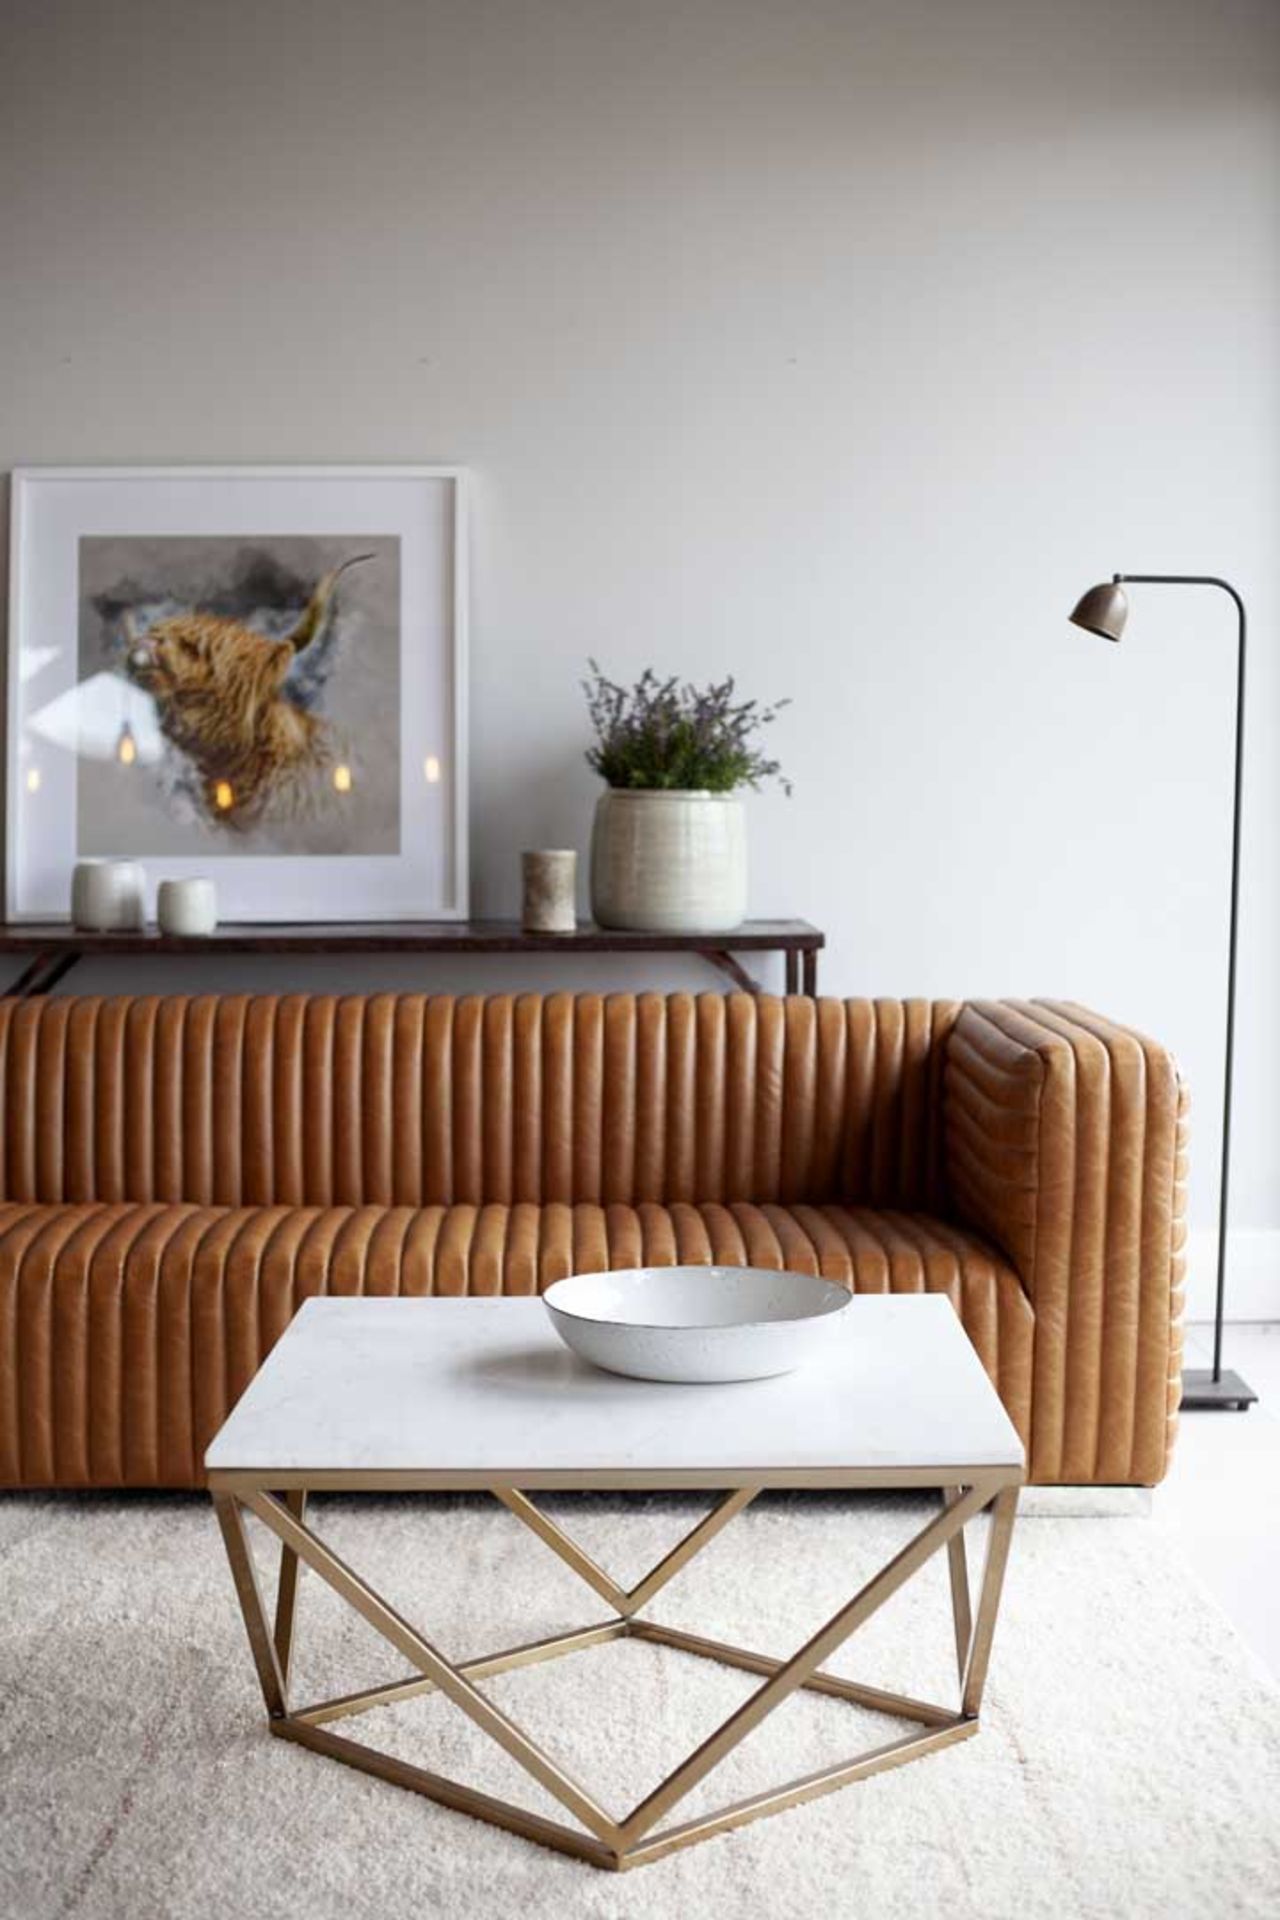 Geometric 30" Coffee Table - White and Gold: A contemporary marble topped coffee table. - Image 2 of 3